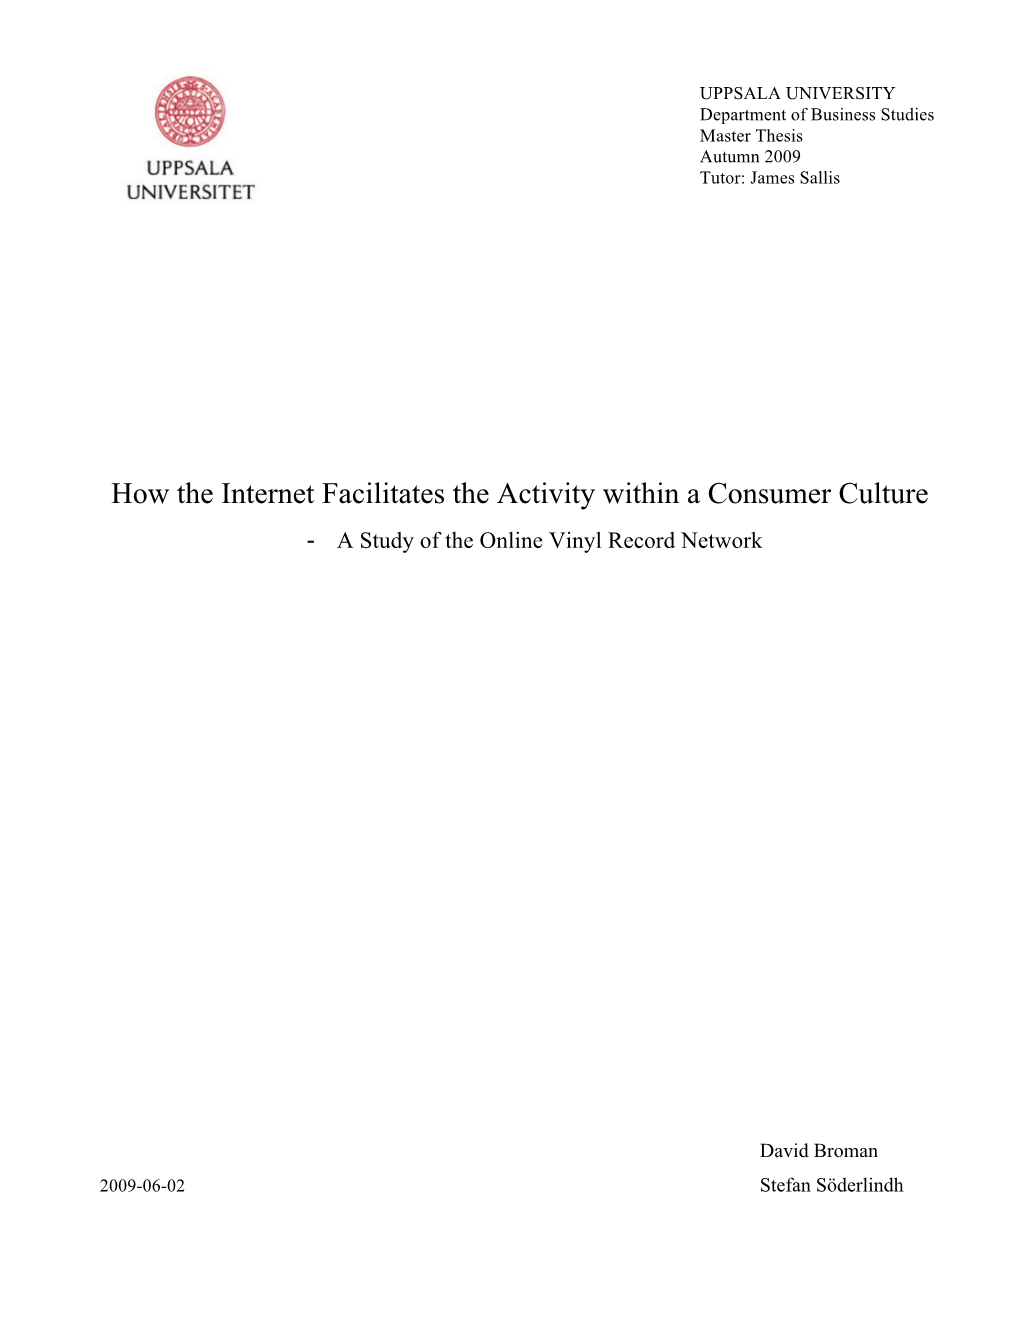 How the Internet Facilitates the Activity Within a Consumer Culture - a Study of the Online Vinyl Record Network